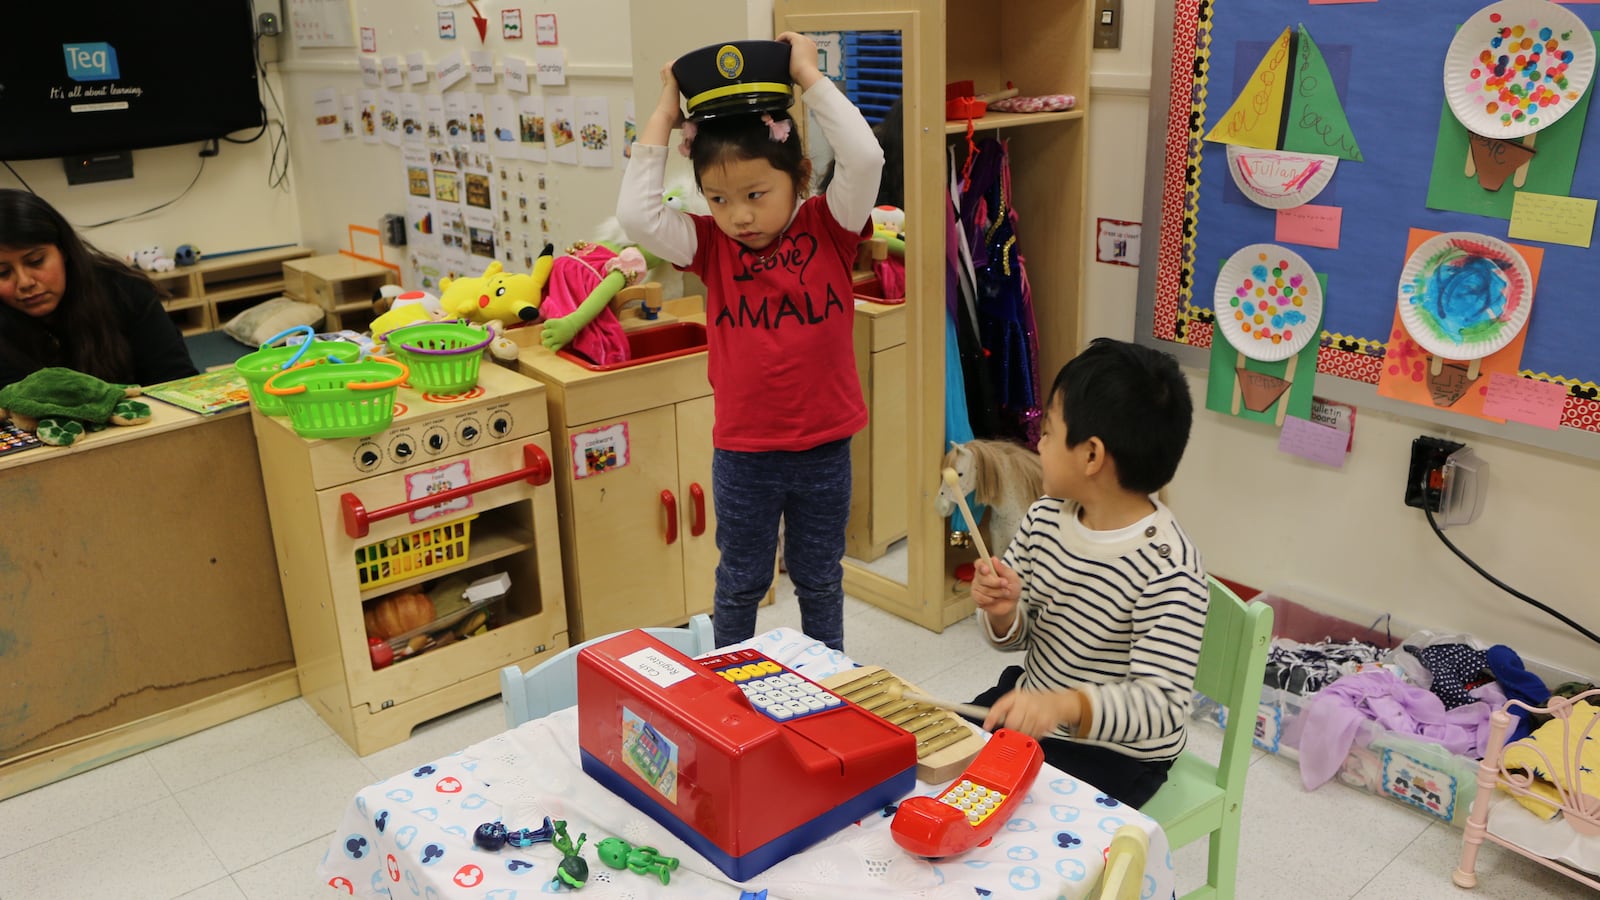 Pre-K students play during center time at The Renaissance Charter School in Jackson Heights, Queens. The school is one of the few charters that participates in the city's pre-K program.